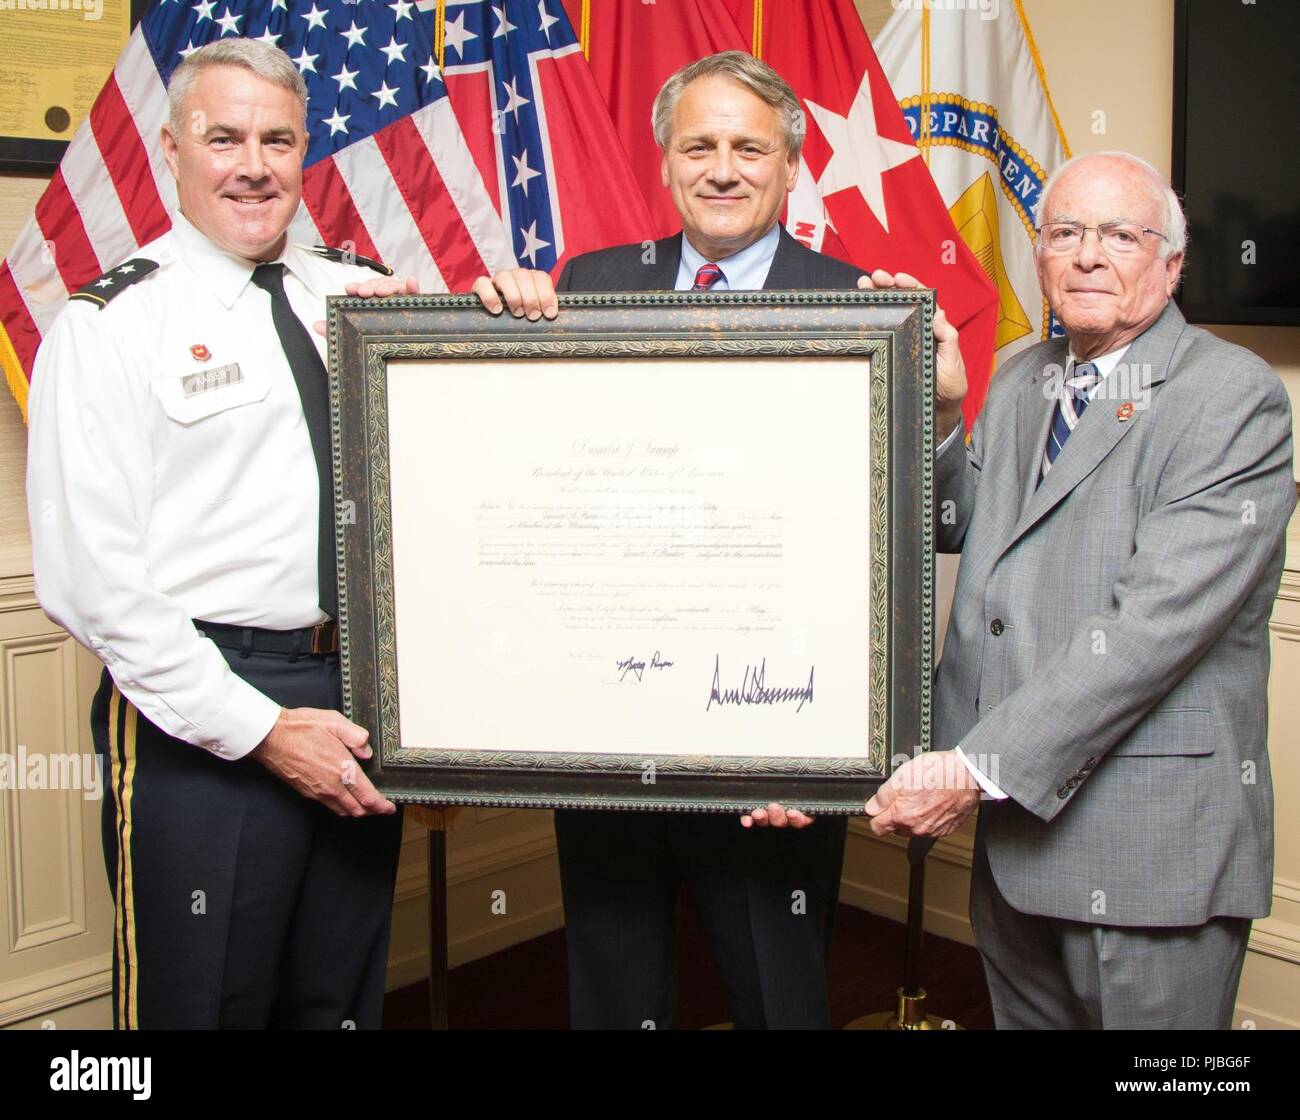 Mississippi River Commission President Maj. Gen. Richard Kaiser and MRC member Sam Angel present an appointment letter to James A. Reeder at the MRC headquarters in Vicksburg, Miss., July 11, 2018. President Donald Trump appointed Reeder as a member of the Mississippi River Commission May 17, 2018. Commission appointments are nominated by the President of the United States and vetted by the U.S. Senate. (USACE Stock Photo